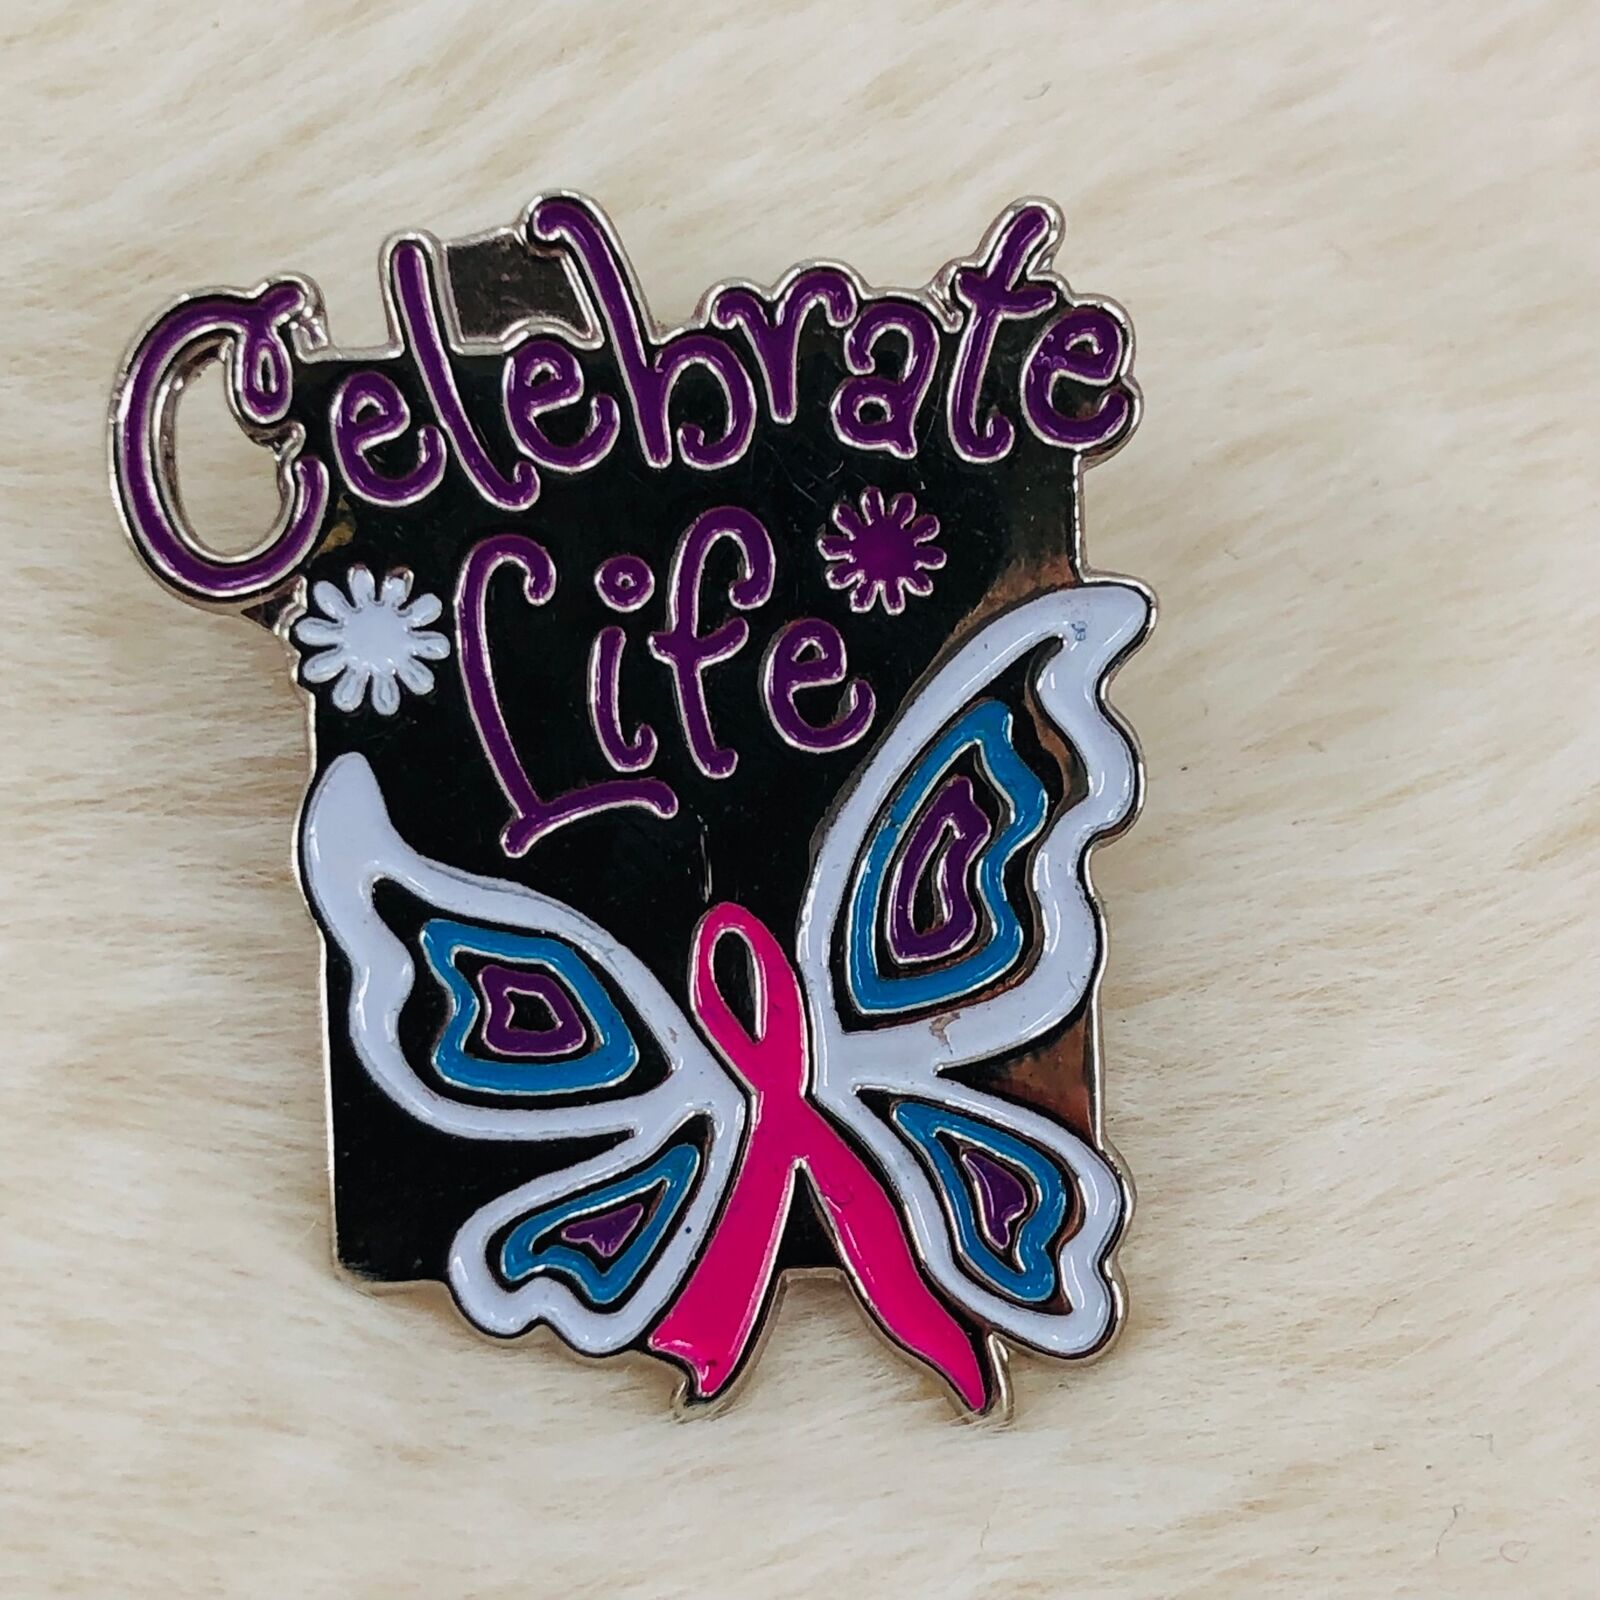 Celebrate Life Breast Cancer Support Pink Ribbon Lapel Pin w/ Butterfly